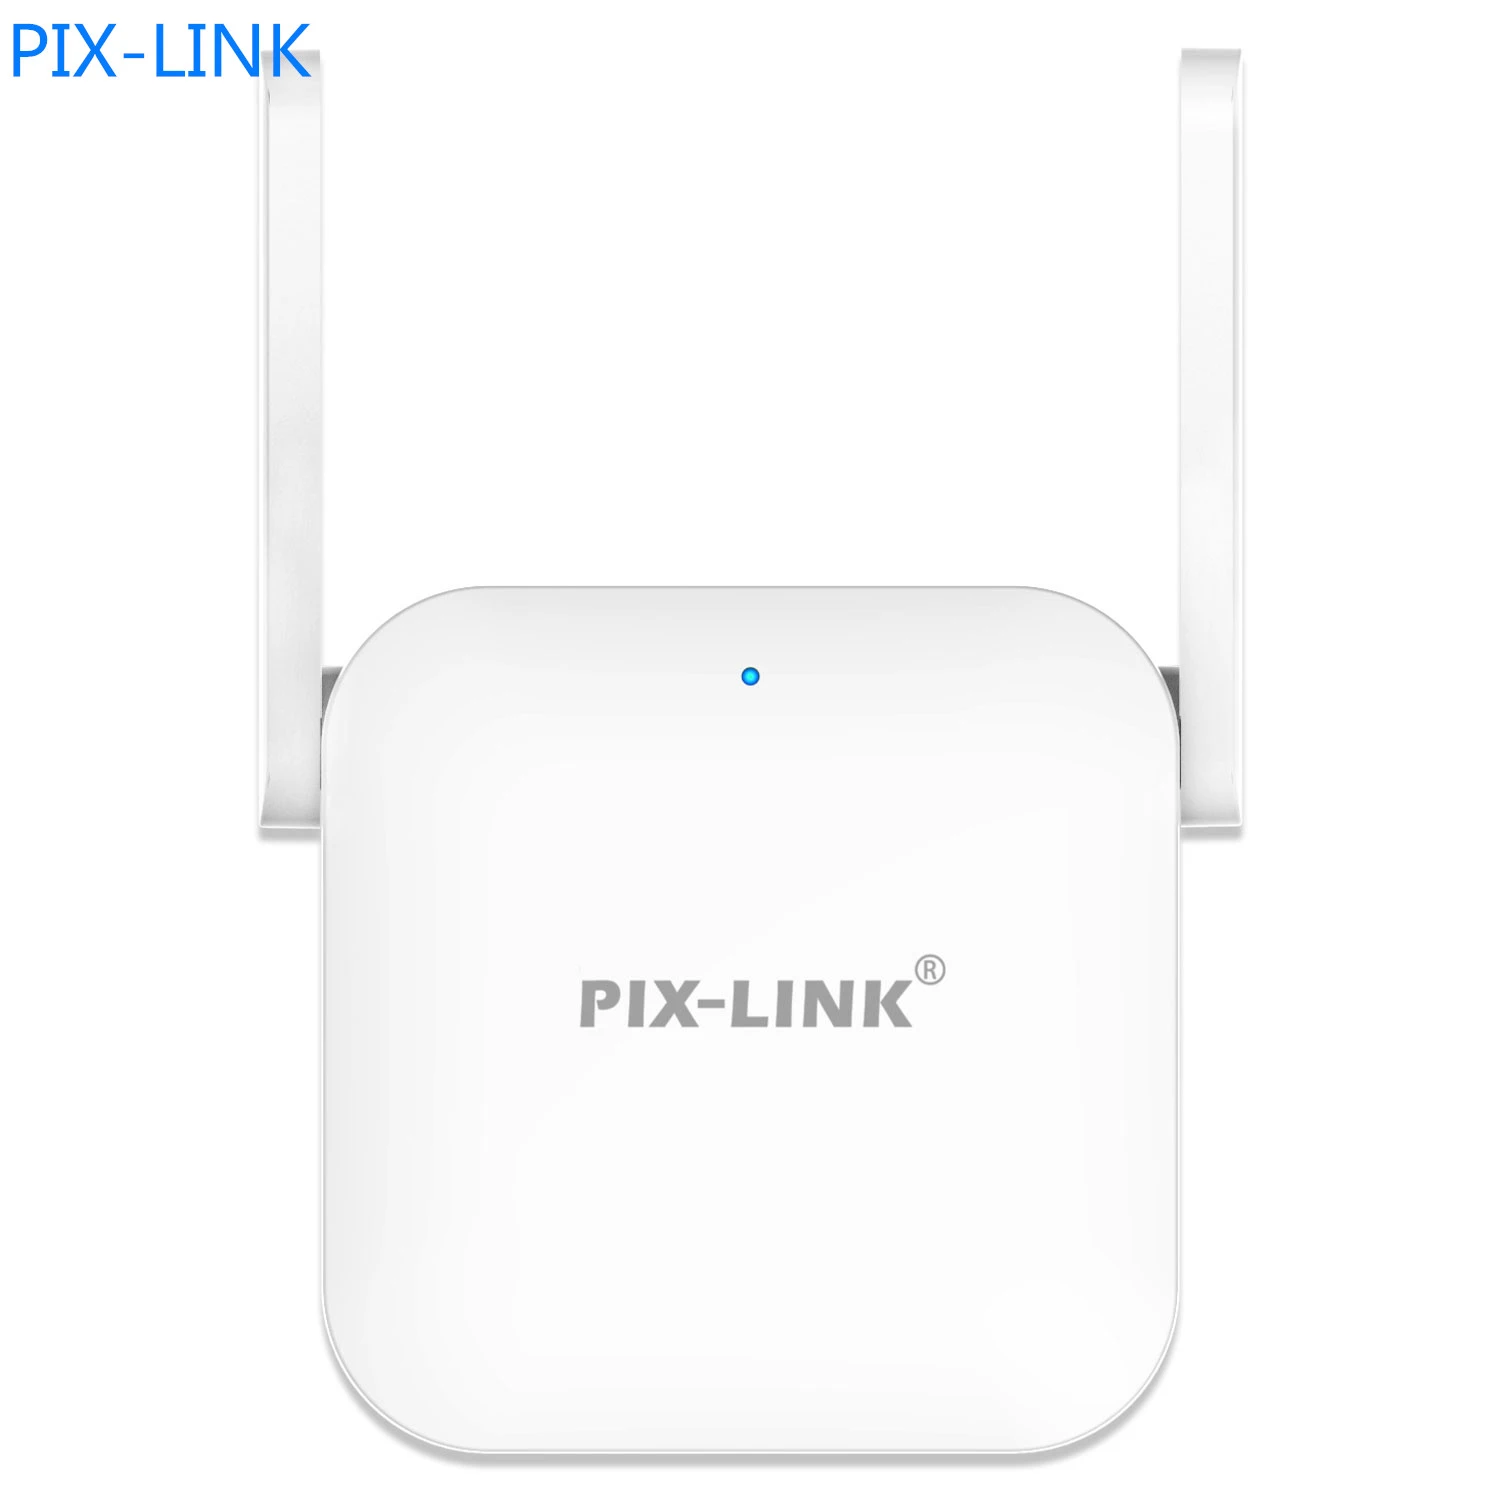 PIX-LINK WR35 Wifi Repeater 802.11b/G/N 300Mbps Wifi Repeater Booster Extender For Home Use wifi repeater amplifier